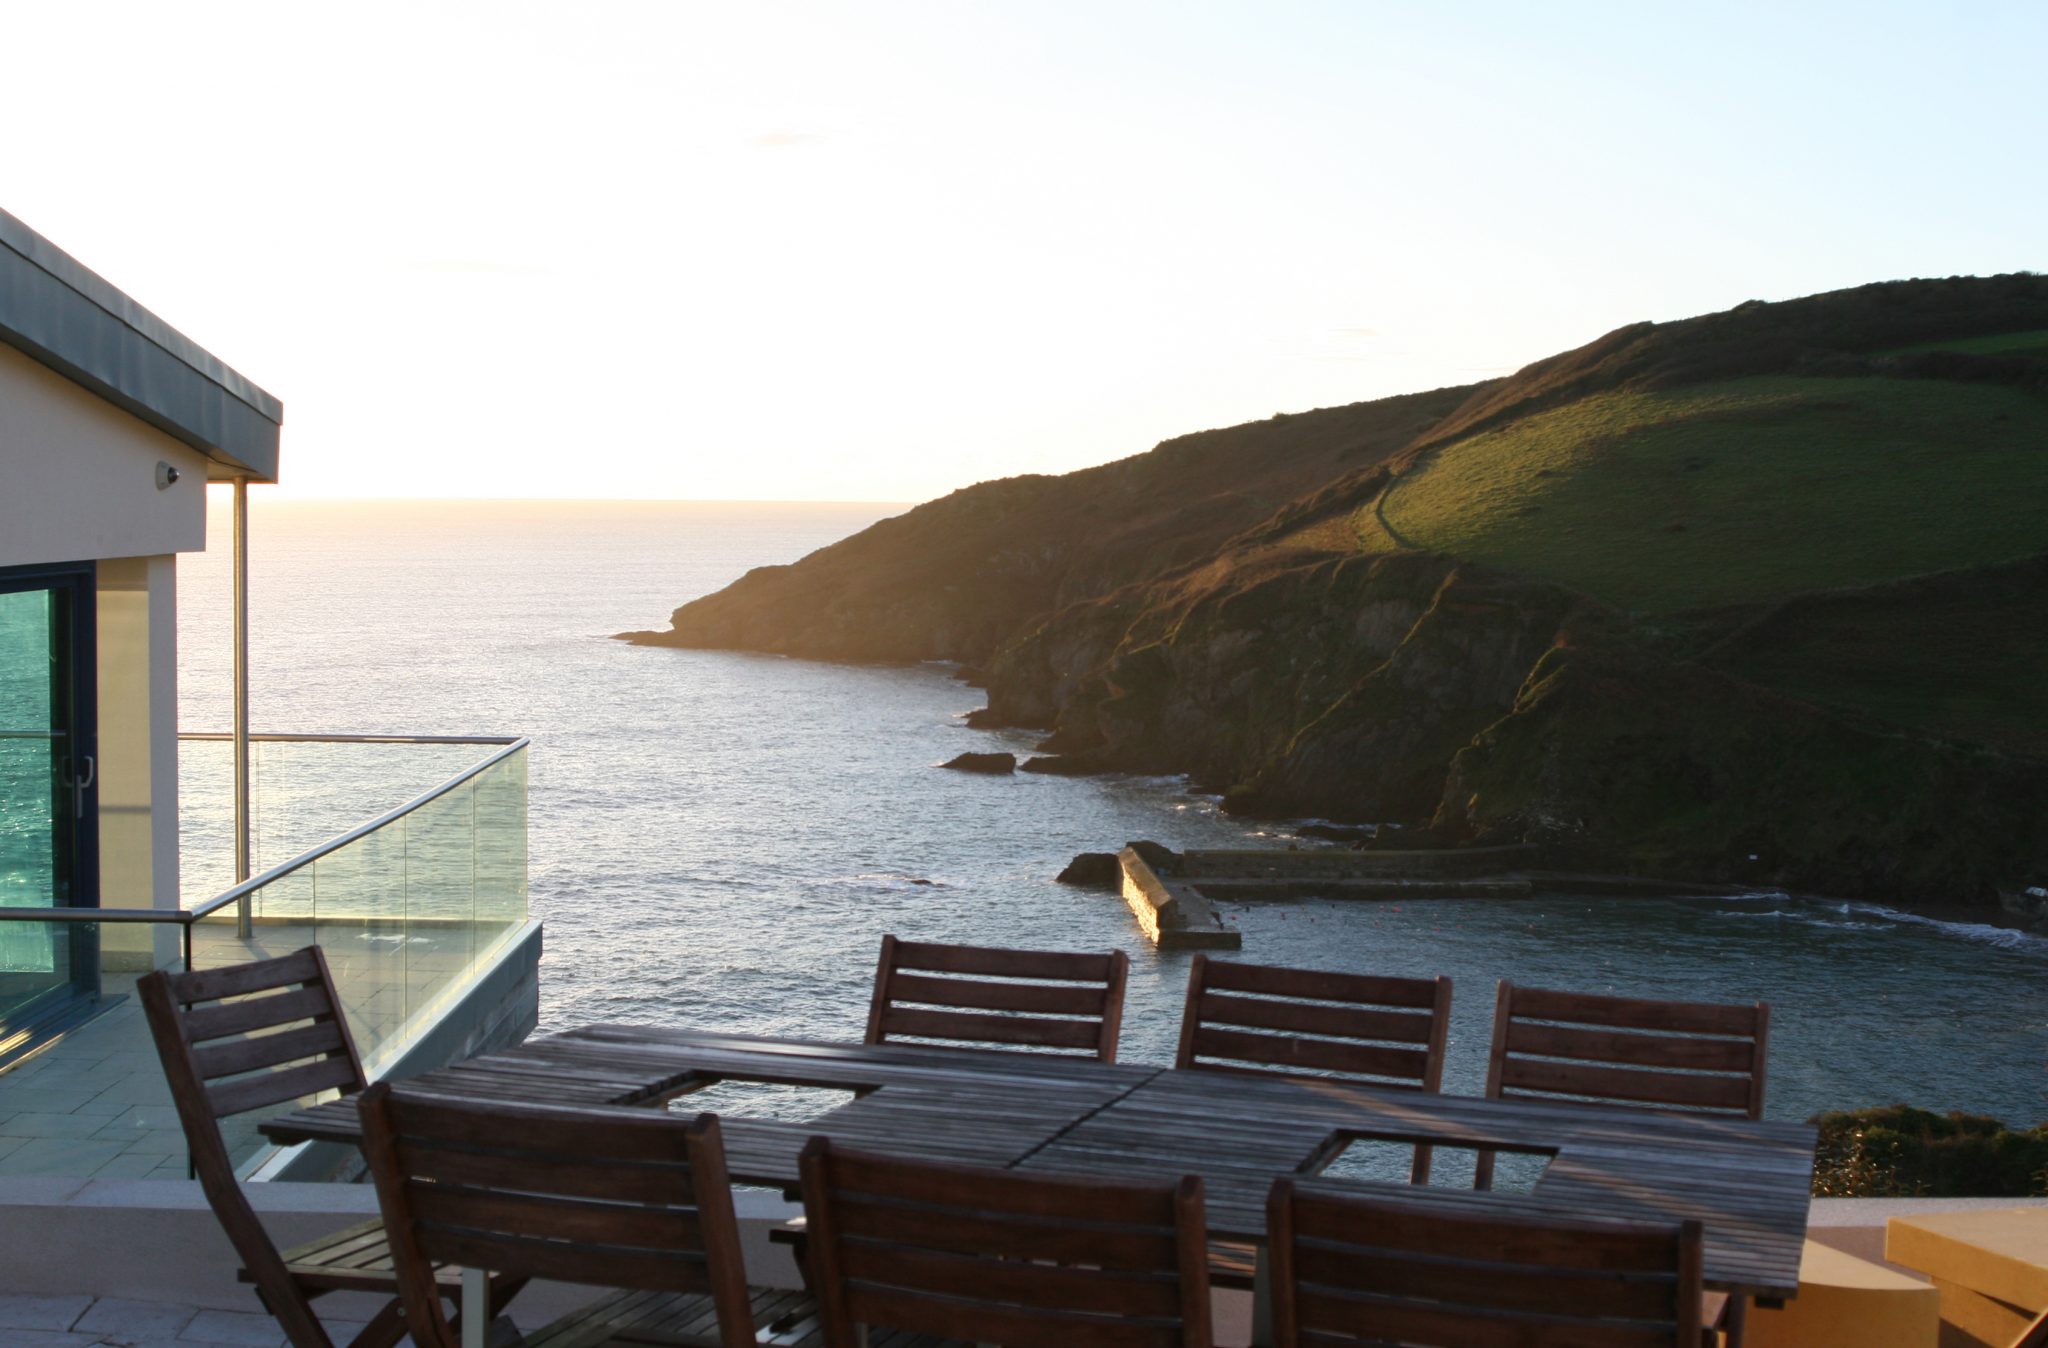 Stephens and stephens developers blue point gorran haven cornwall table and chairs view